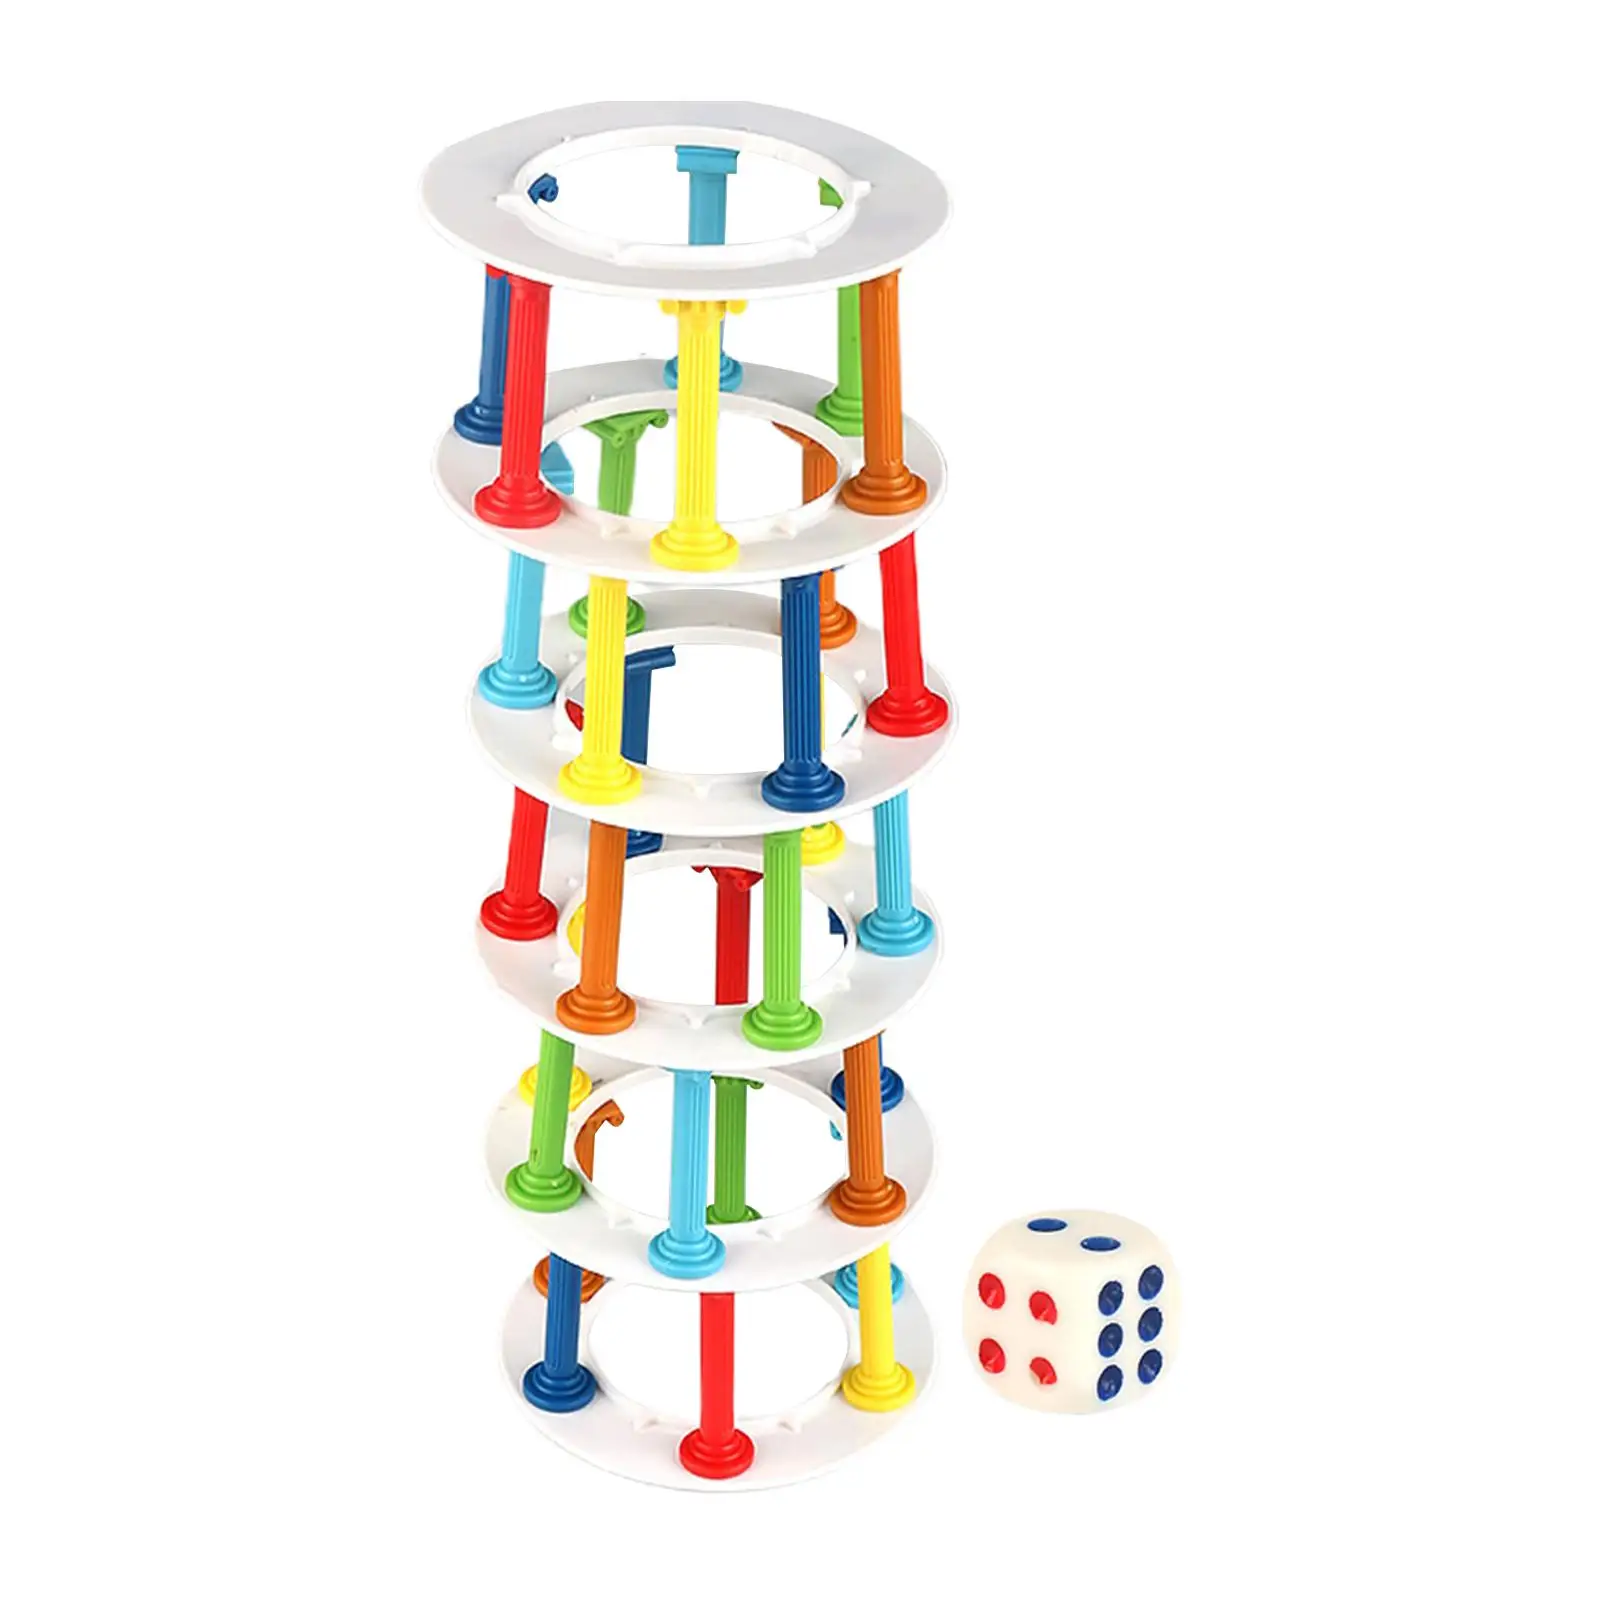 Classic Tumble Tower Game Balance Game Board Games with Dice Stacking Game for Family Game Indoor ,Entertaining Party Game